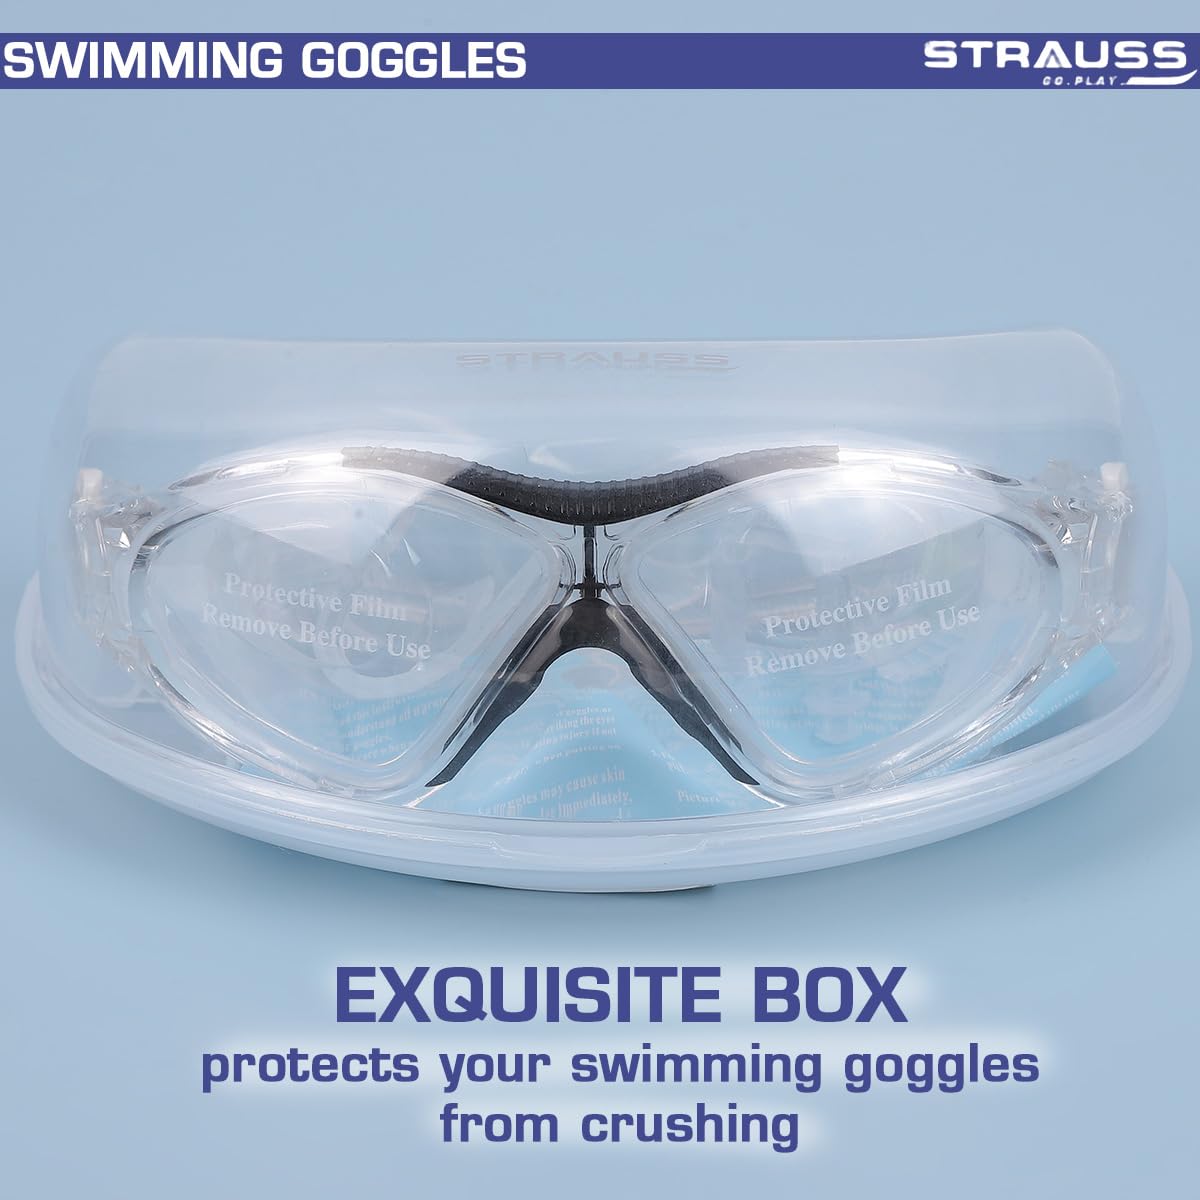 STRAUSS Swimming Goggles | Anti Fog & UV Protection | Swimming Goggles for Adults, Men and Women | Fully Adjustable Swimming Goggles with A Case Cover,(Black)